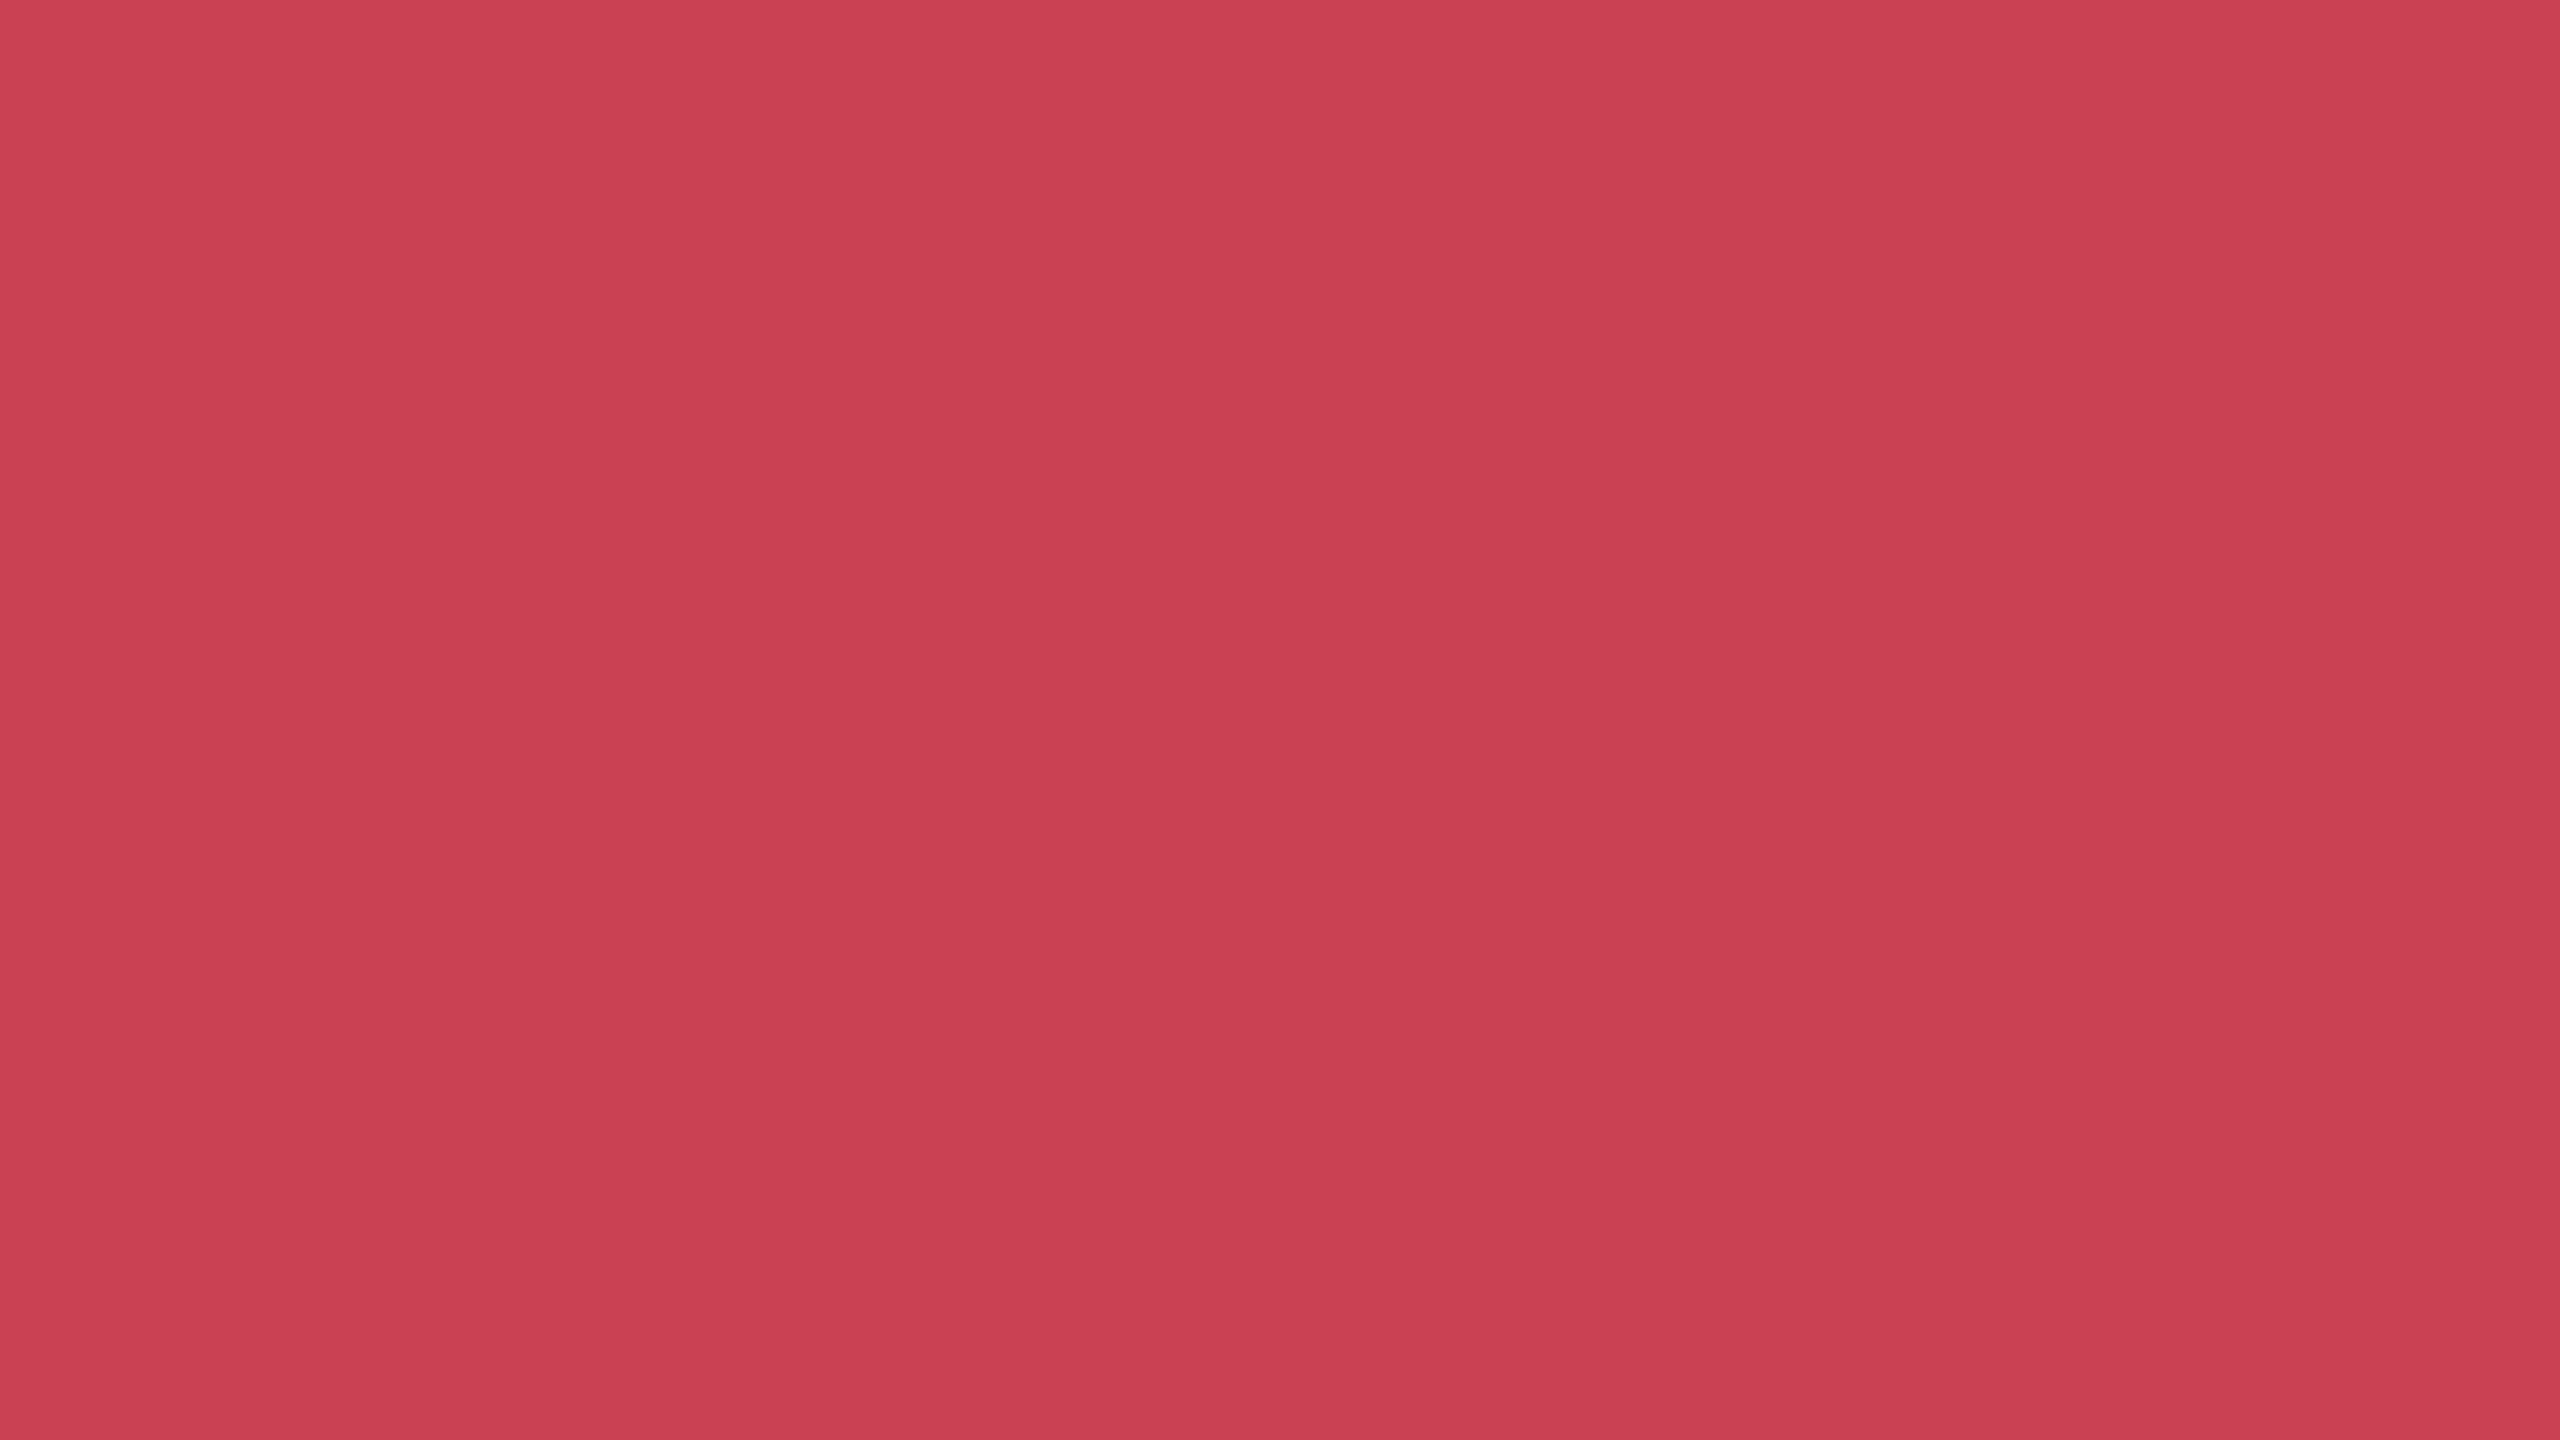 2560x1440 Brick Red Solid Color Background